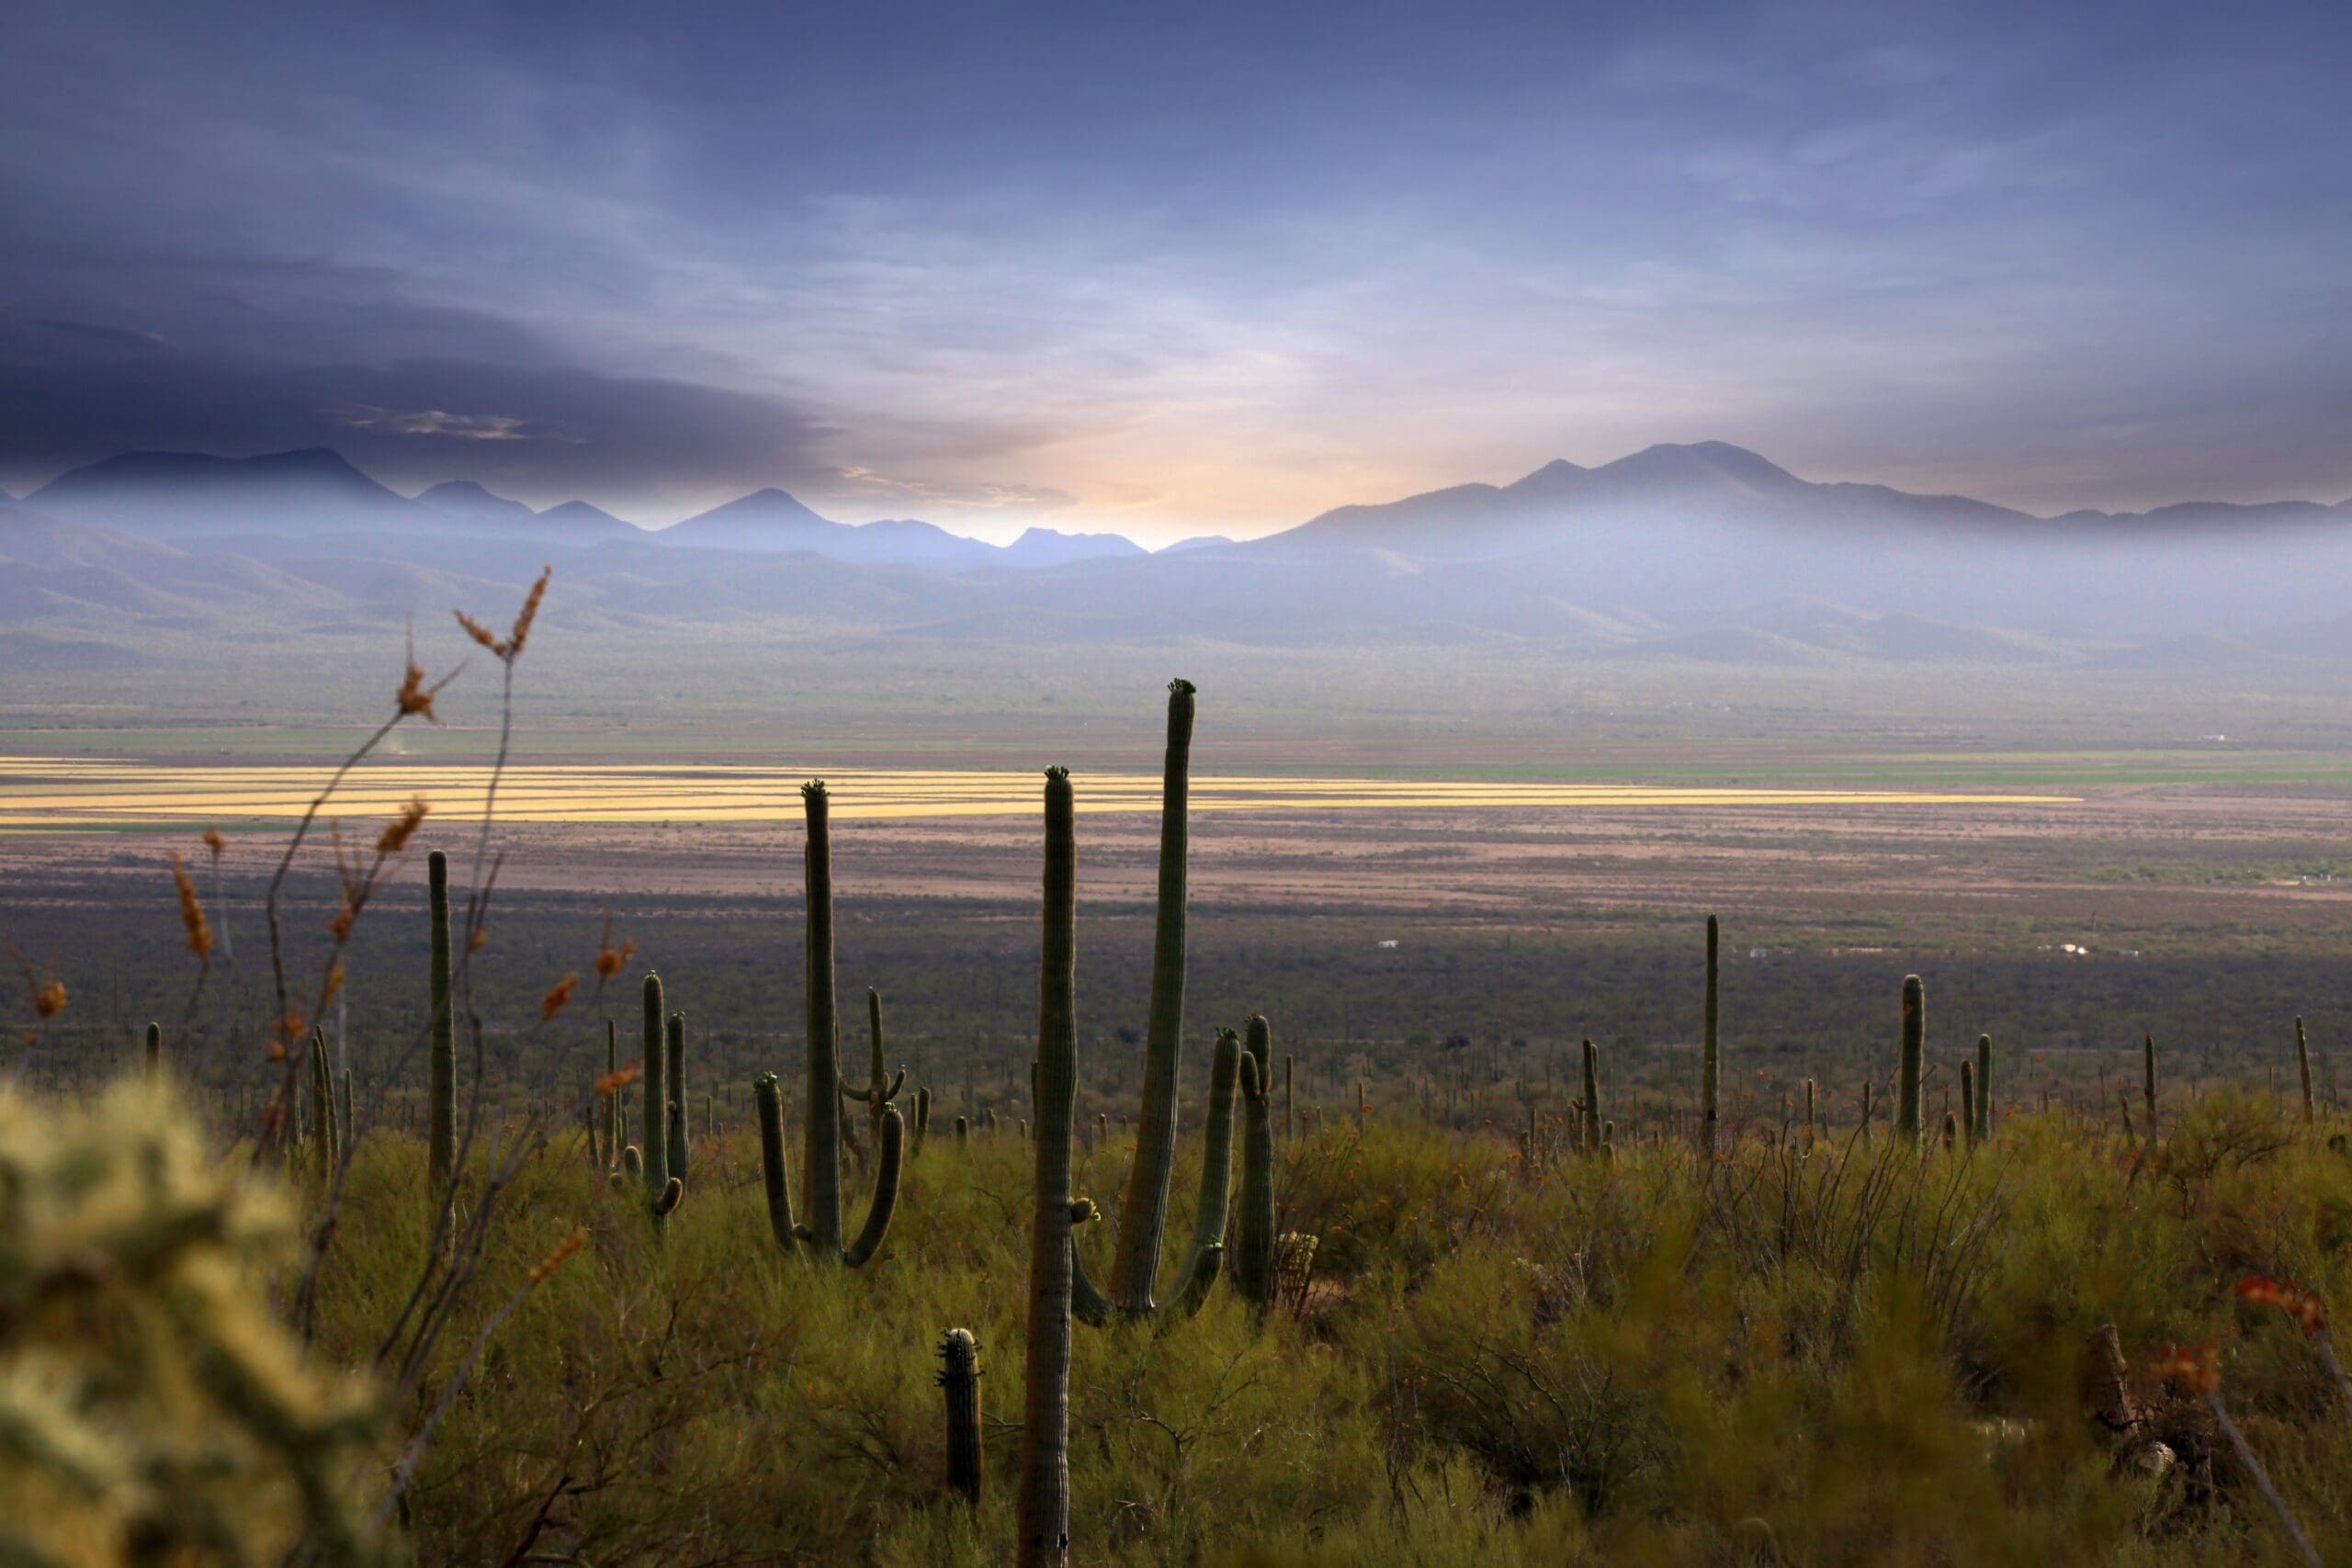 The sun setting over a mountain range in the distance. Miles of brush and cactus stand between the view and the river cutting through the middle of the scene.